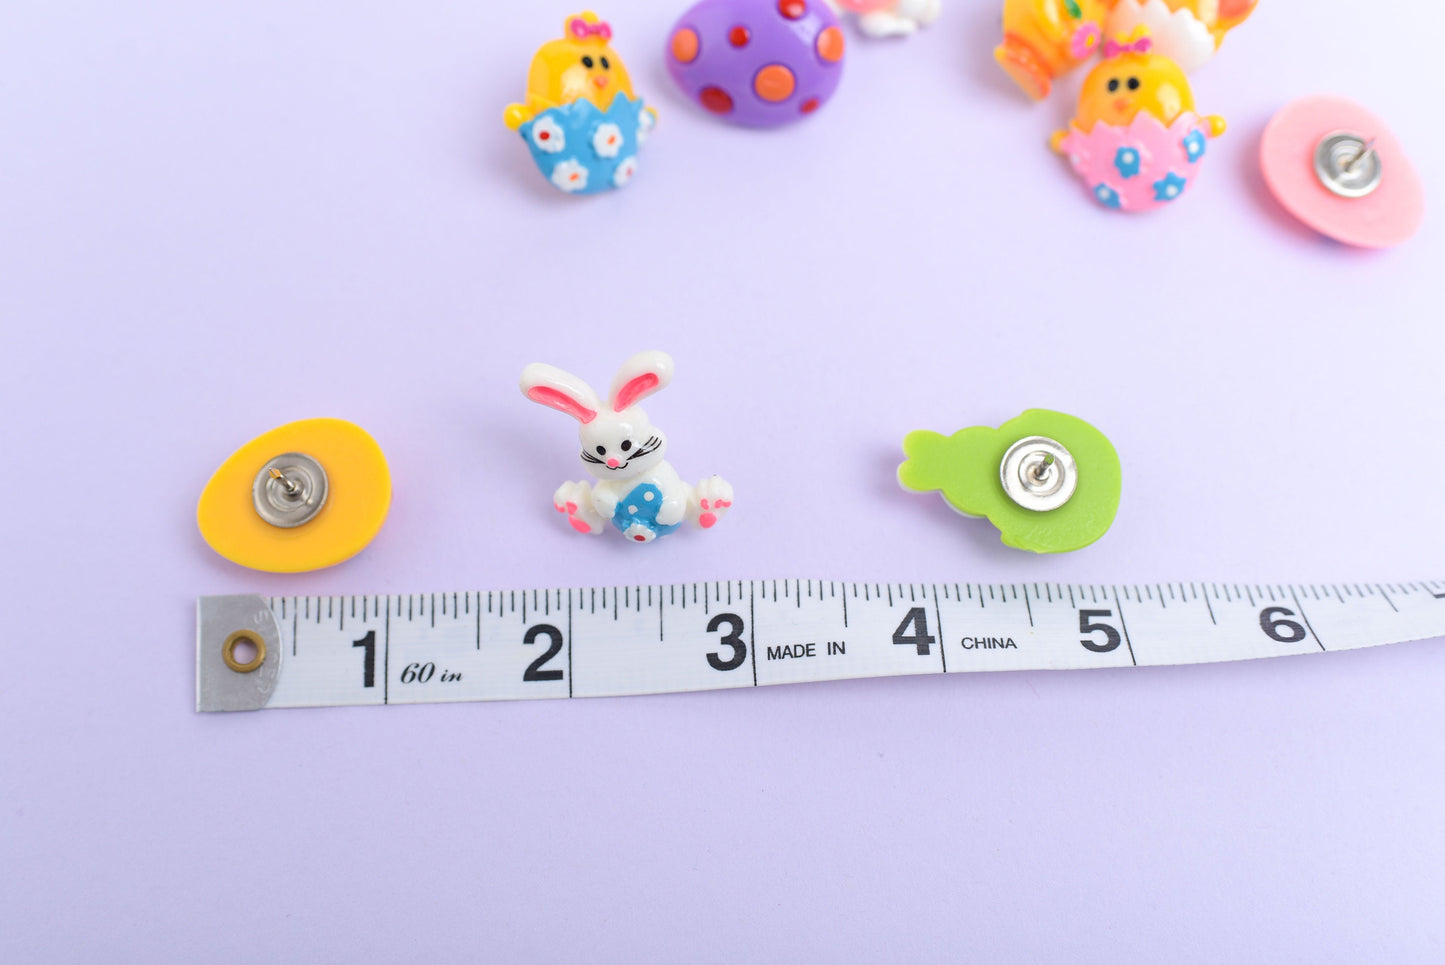 Assorted Easter Push Pins- Set of 10